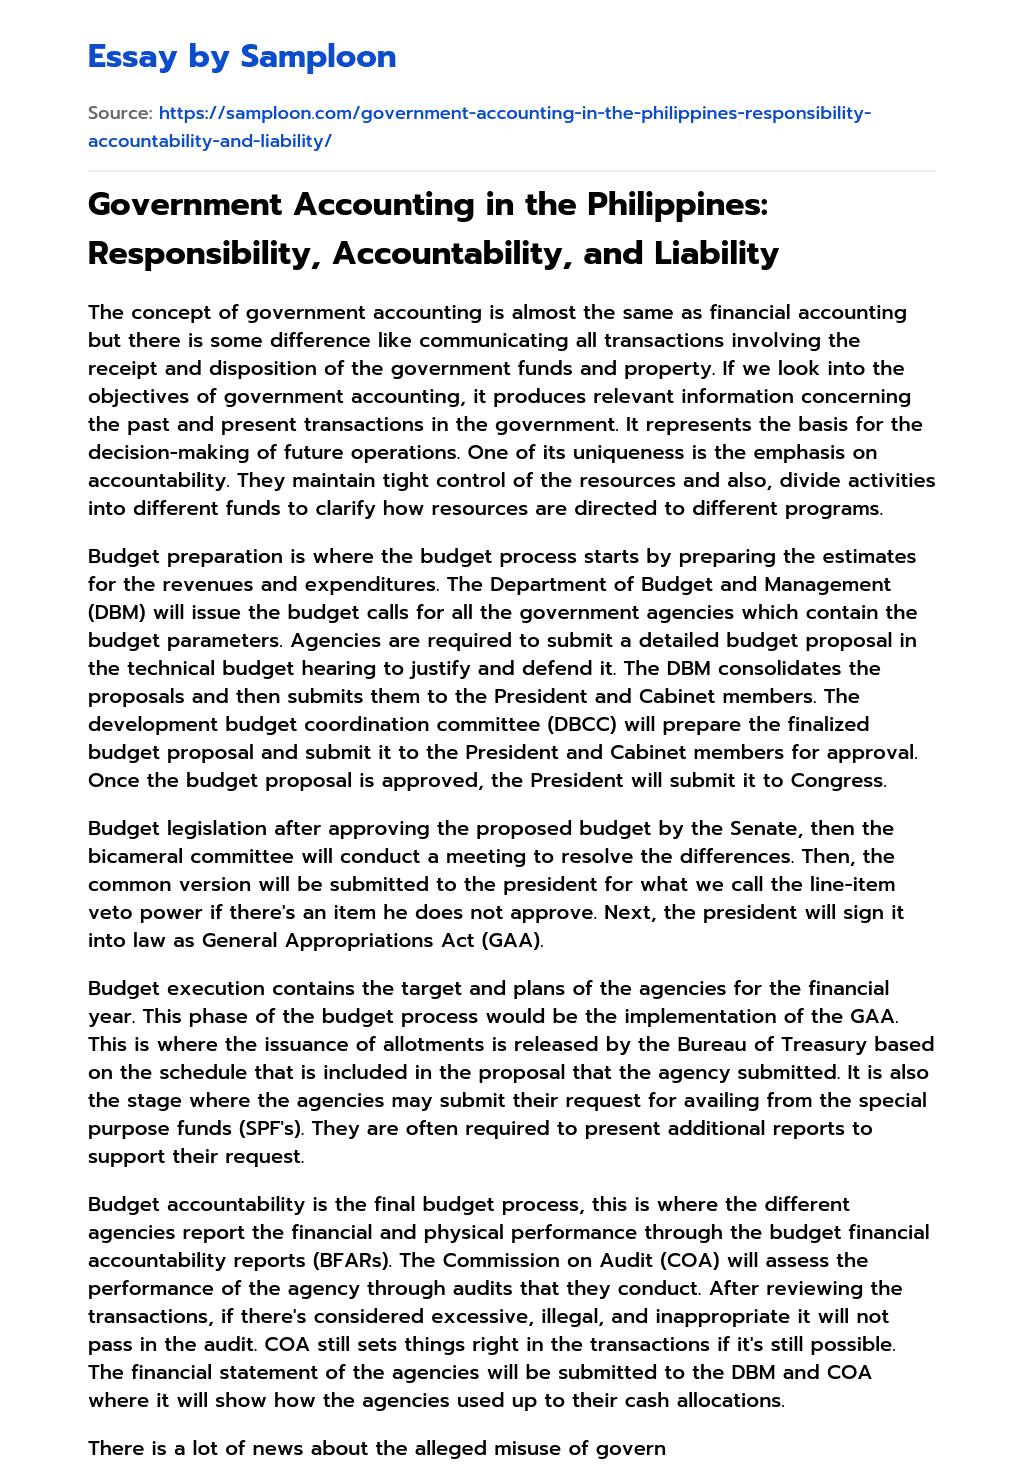 Government Accounting in the Philippines: Responsibility, Accountability, and Liability essay